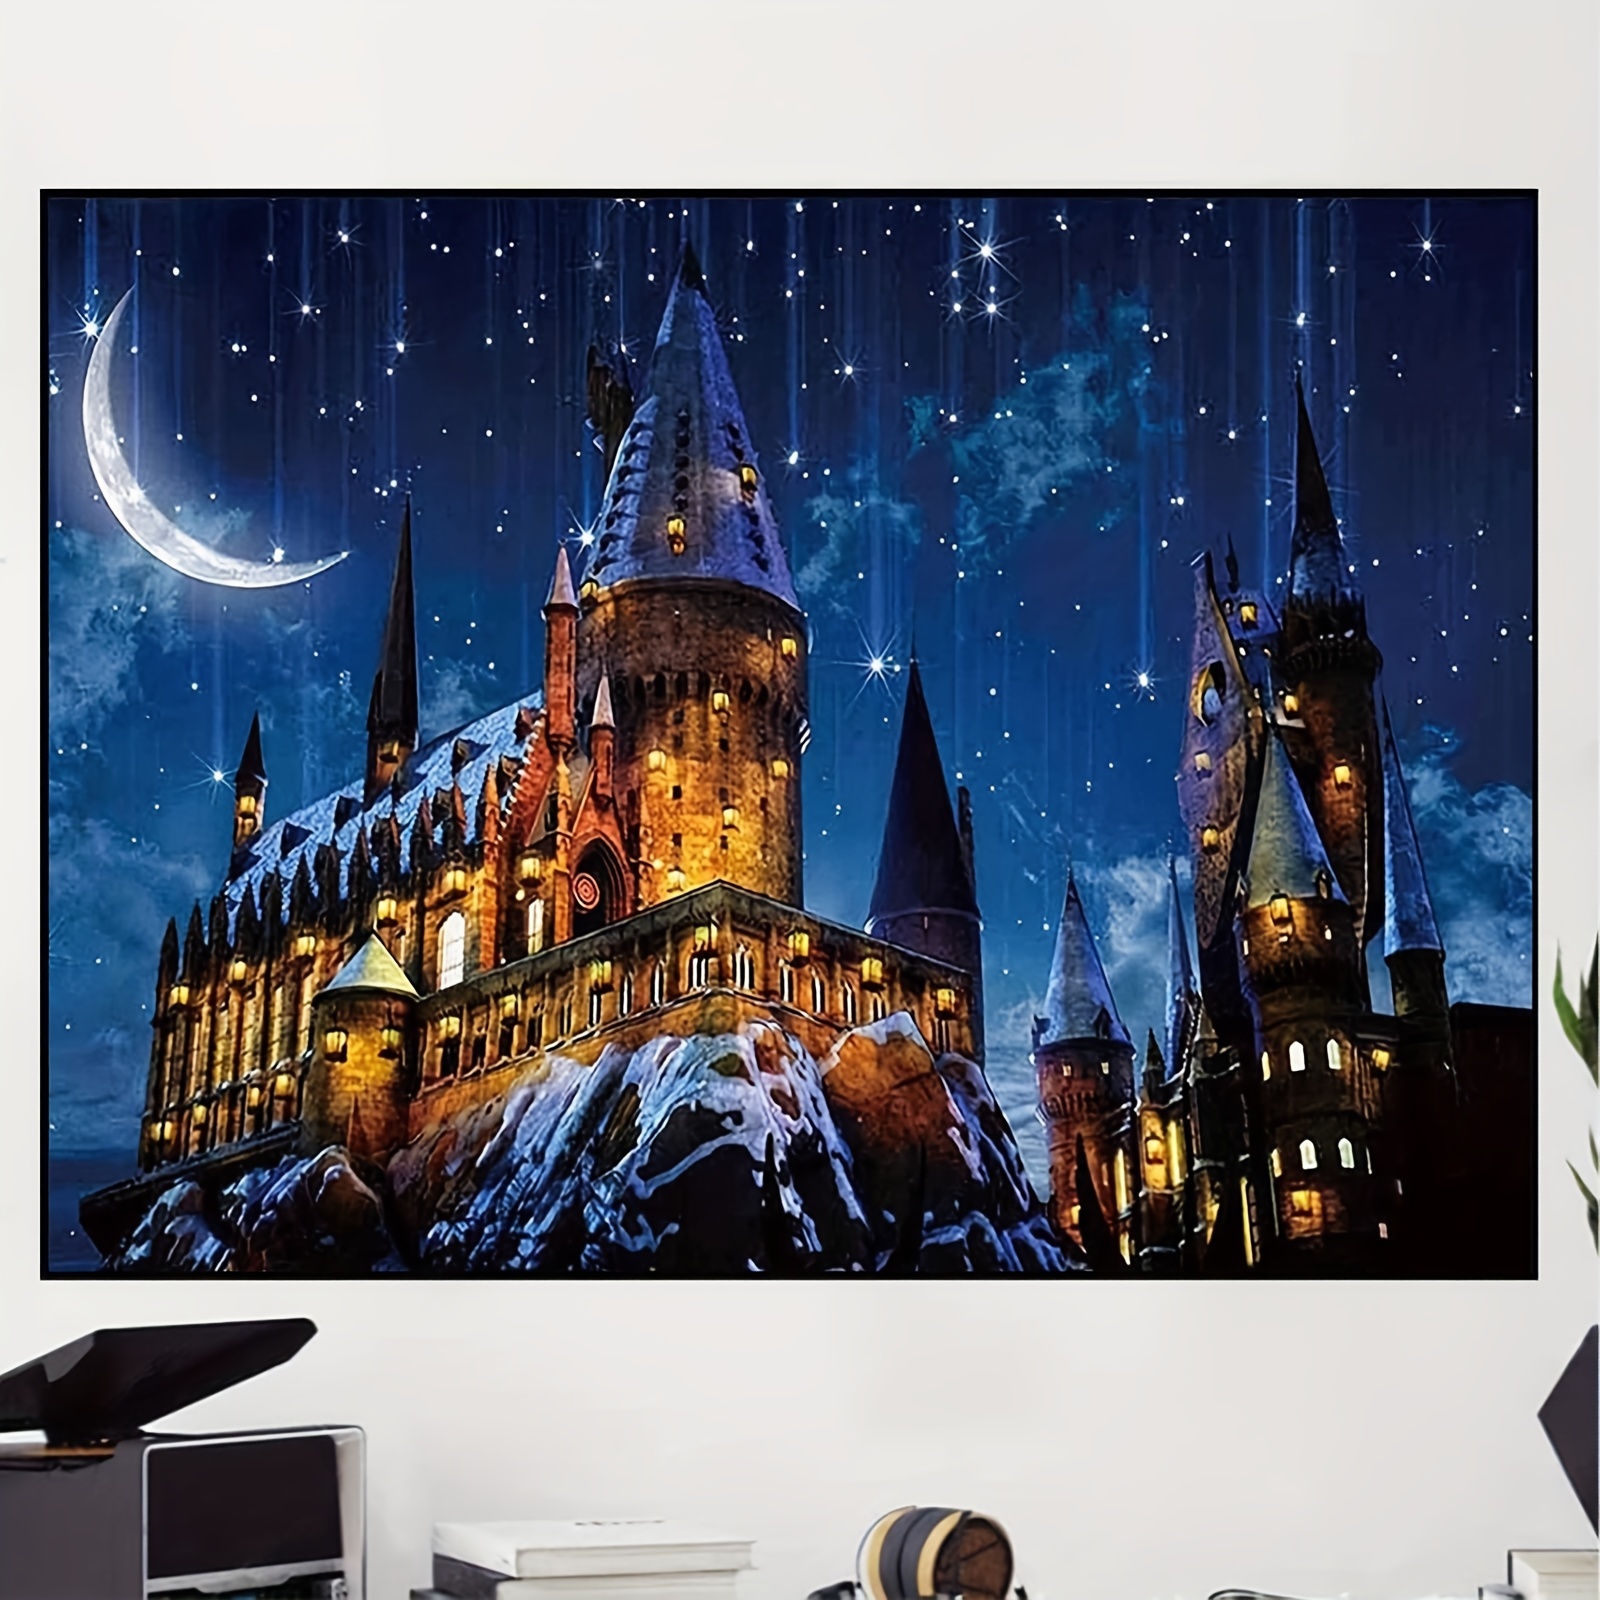 DIY 5D Diamond Painting Kits Harry Potter Hogwarts Film Gift 30x40cm  Embroidery Mosaic Home Decoration Handmade Gifts